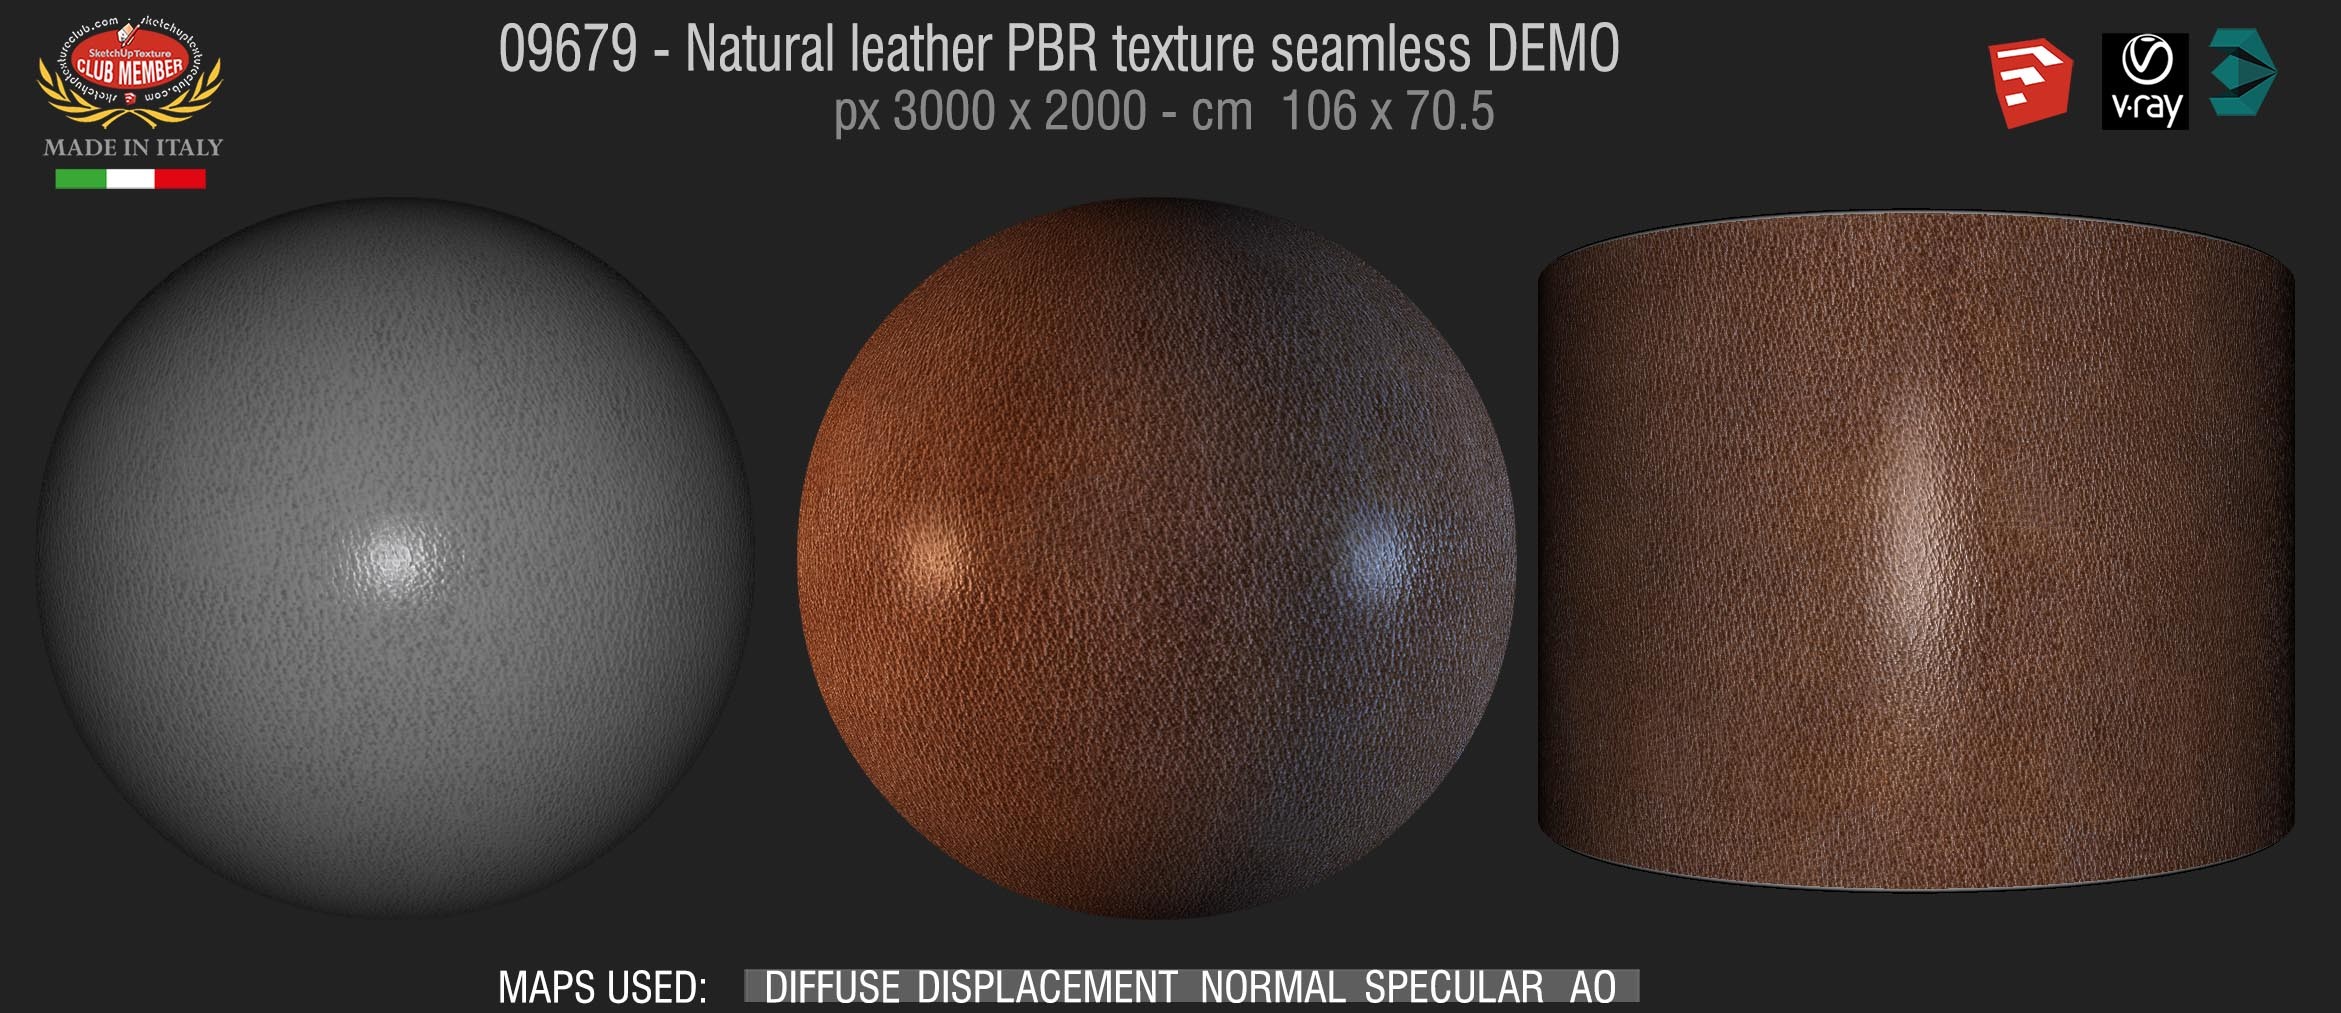 09679 Natural leather PBR texture seamless DEMO